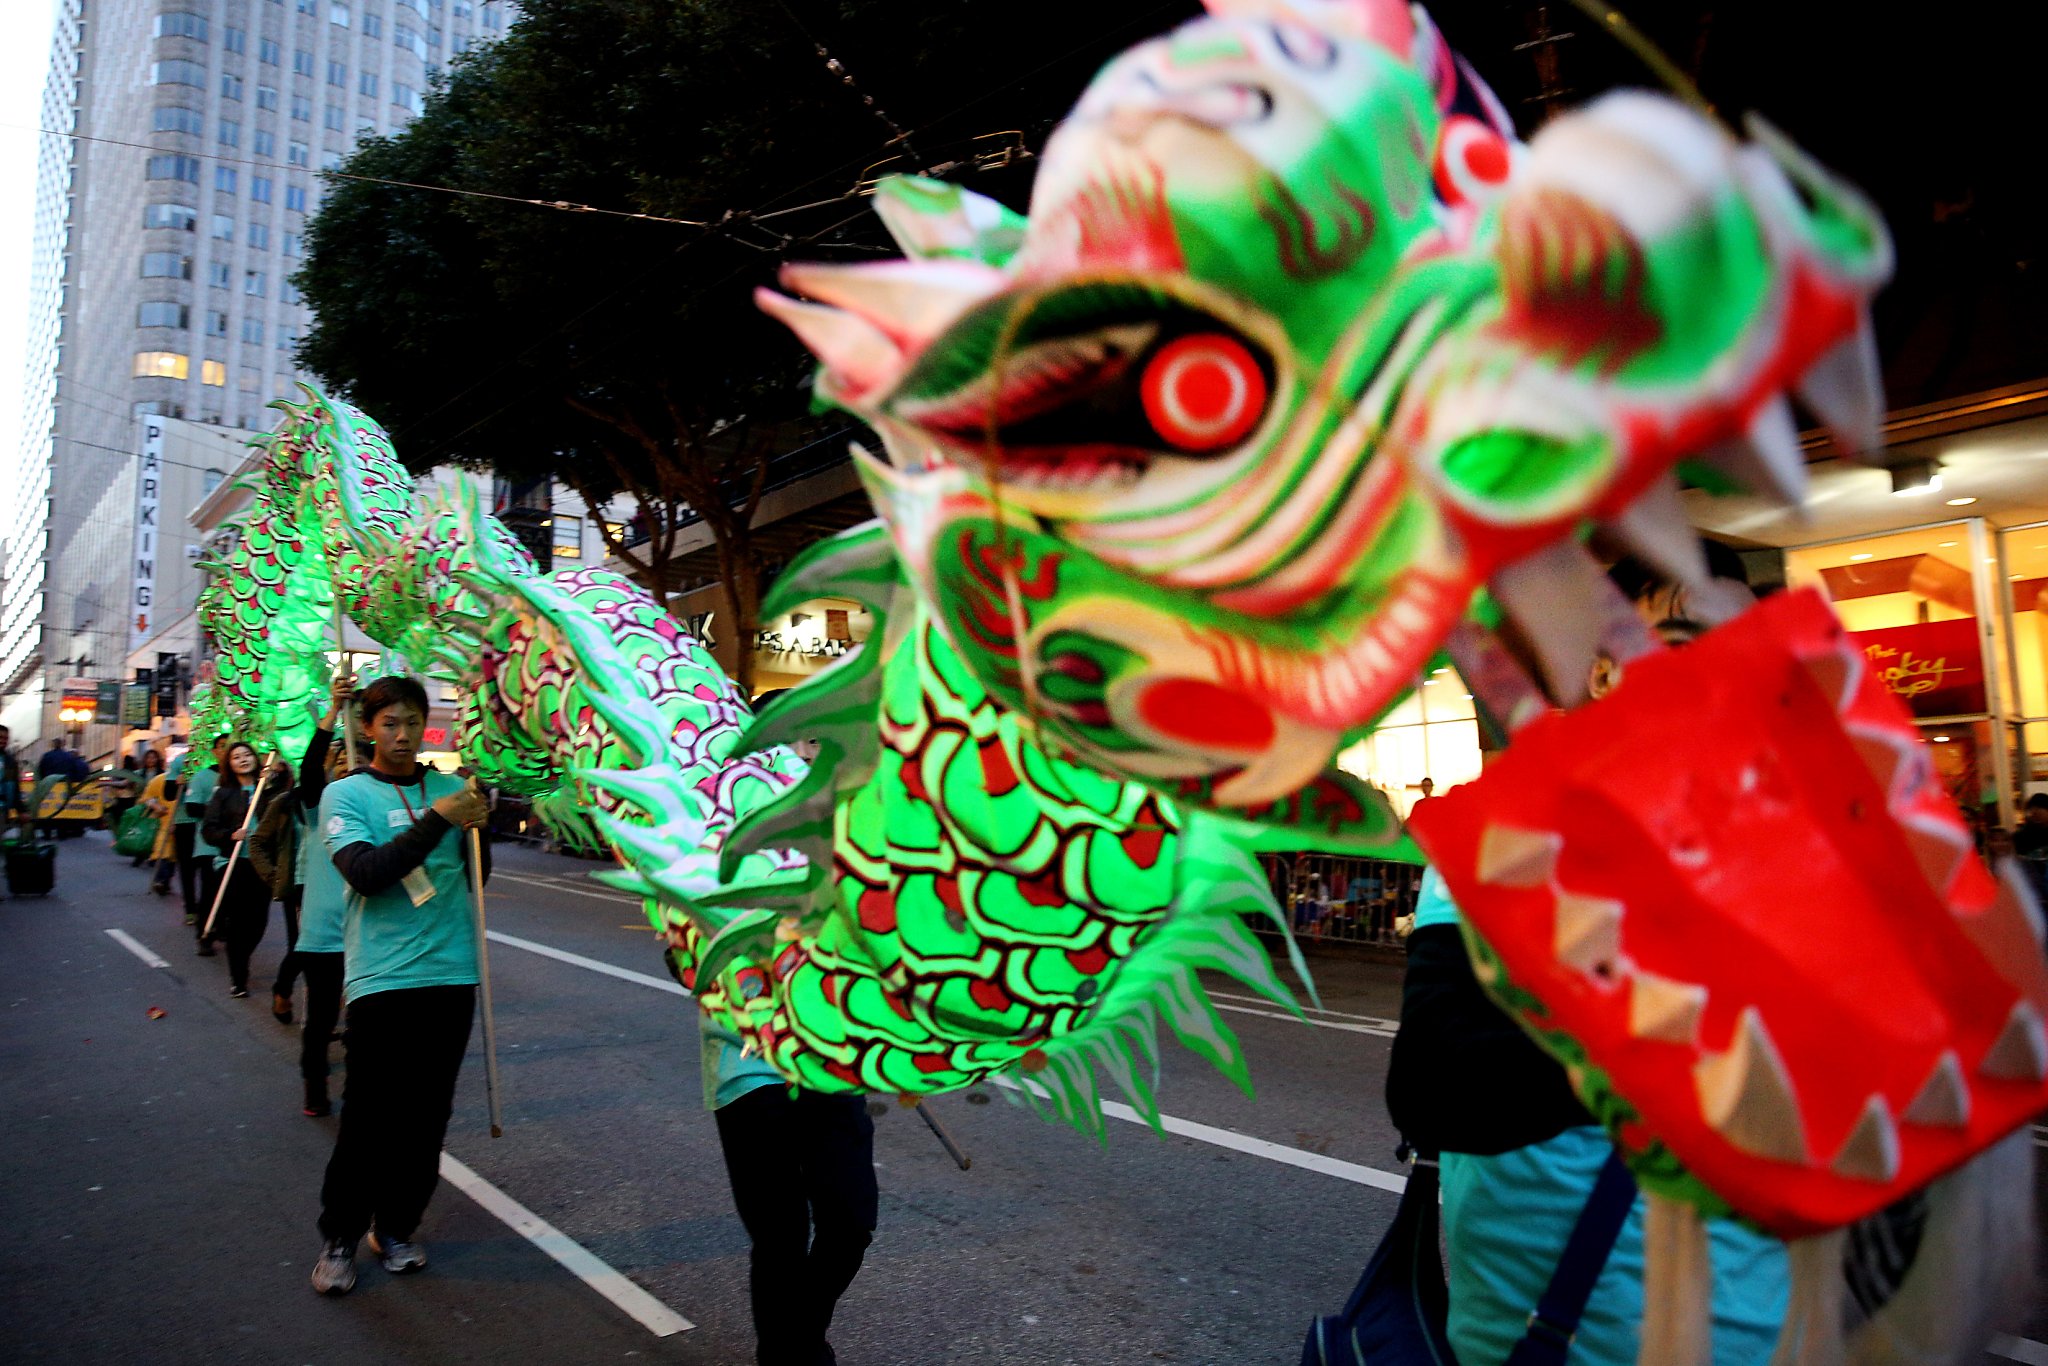 Parade-goers line SF streets to welcome the Year of the Rooster 